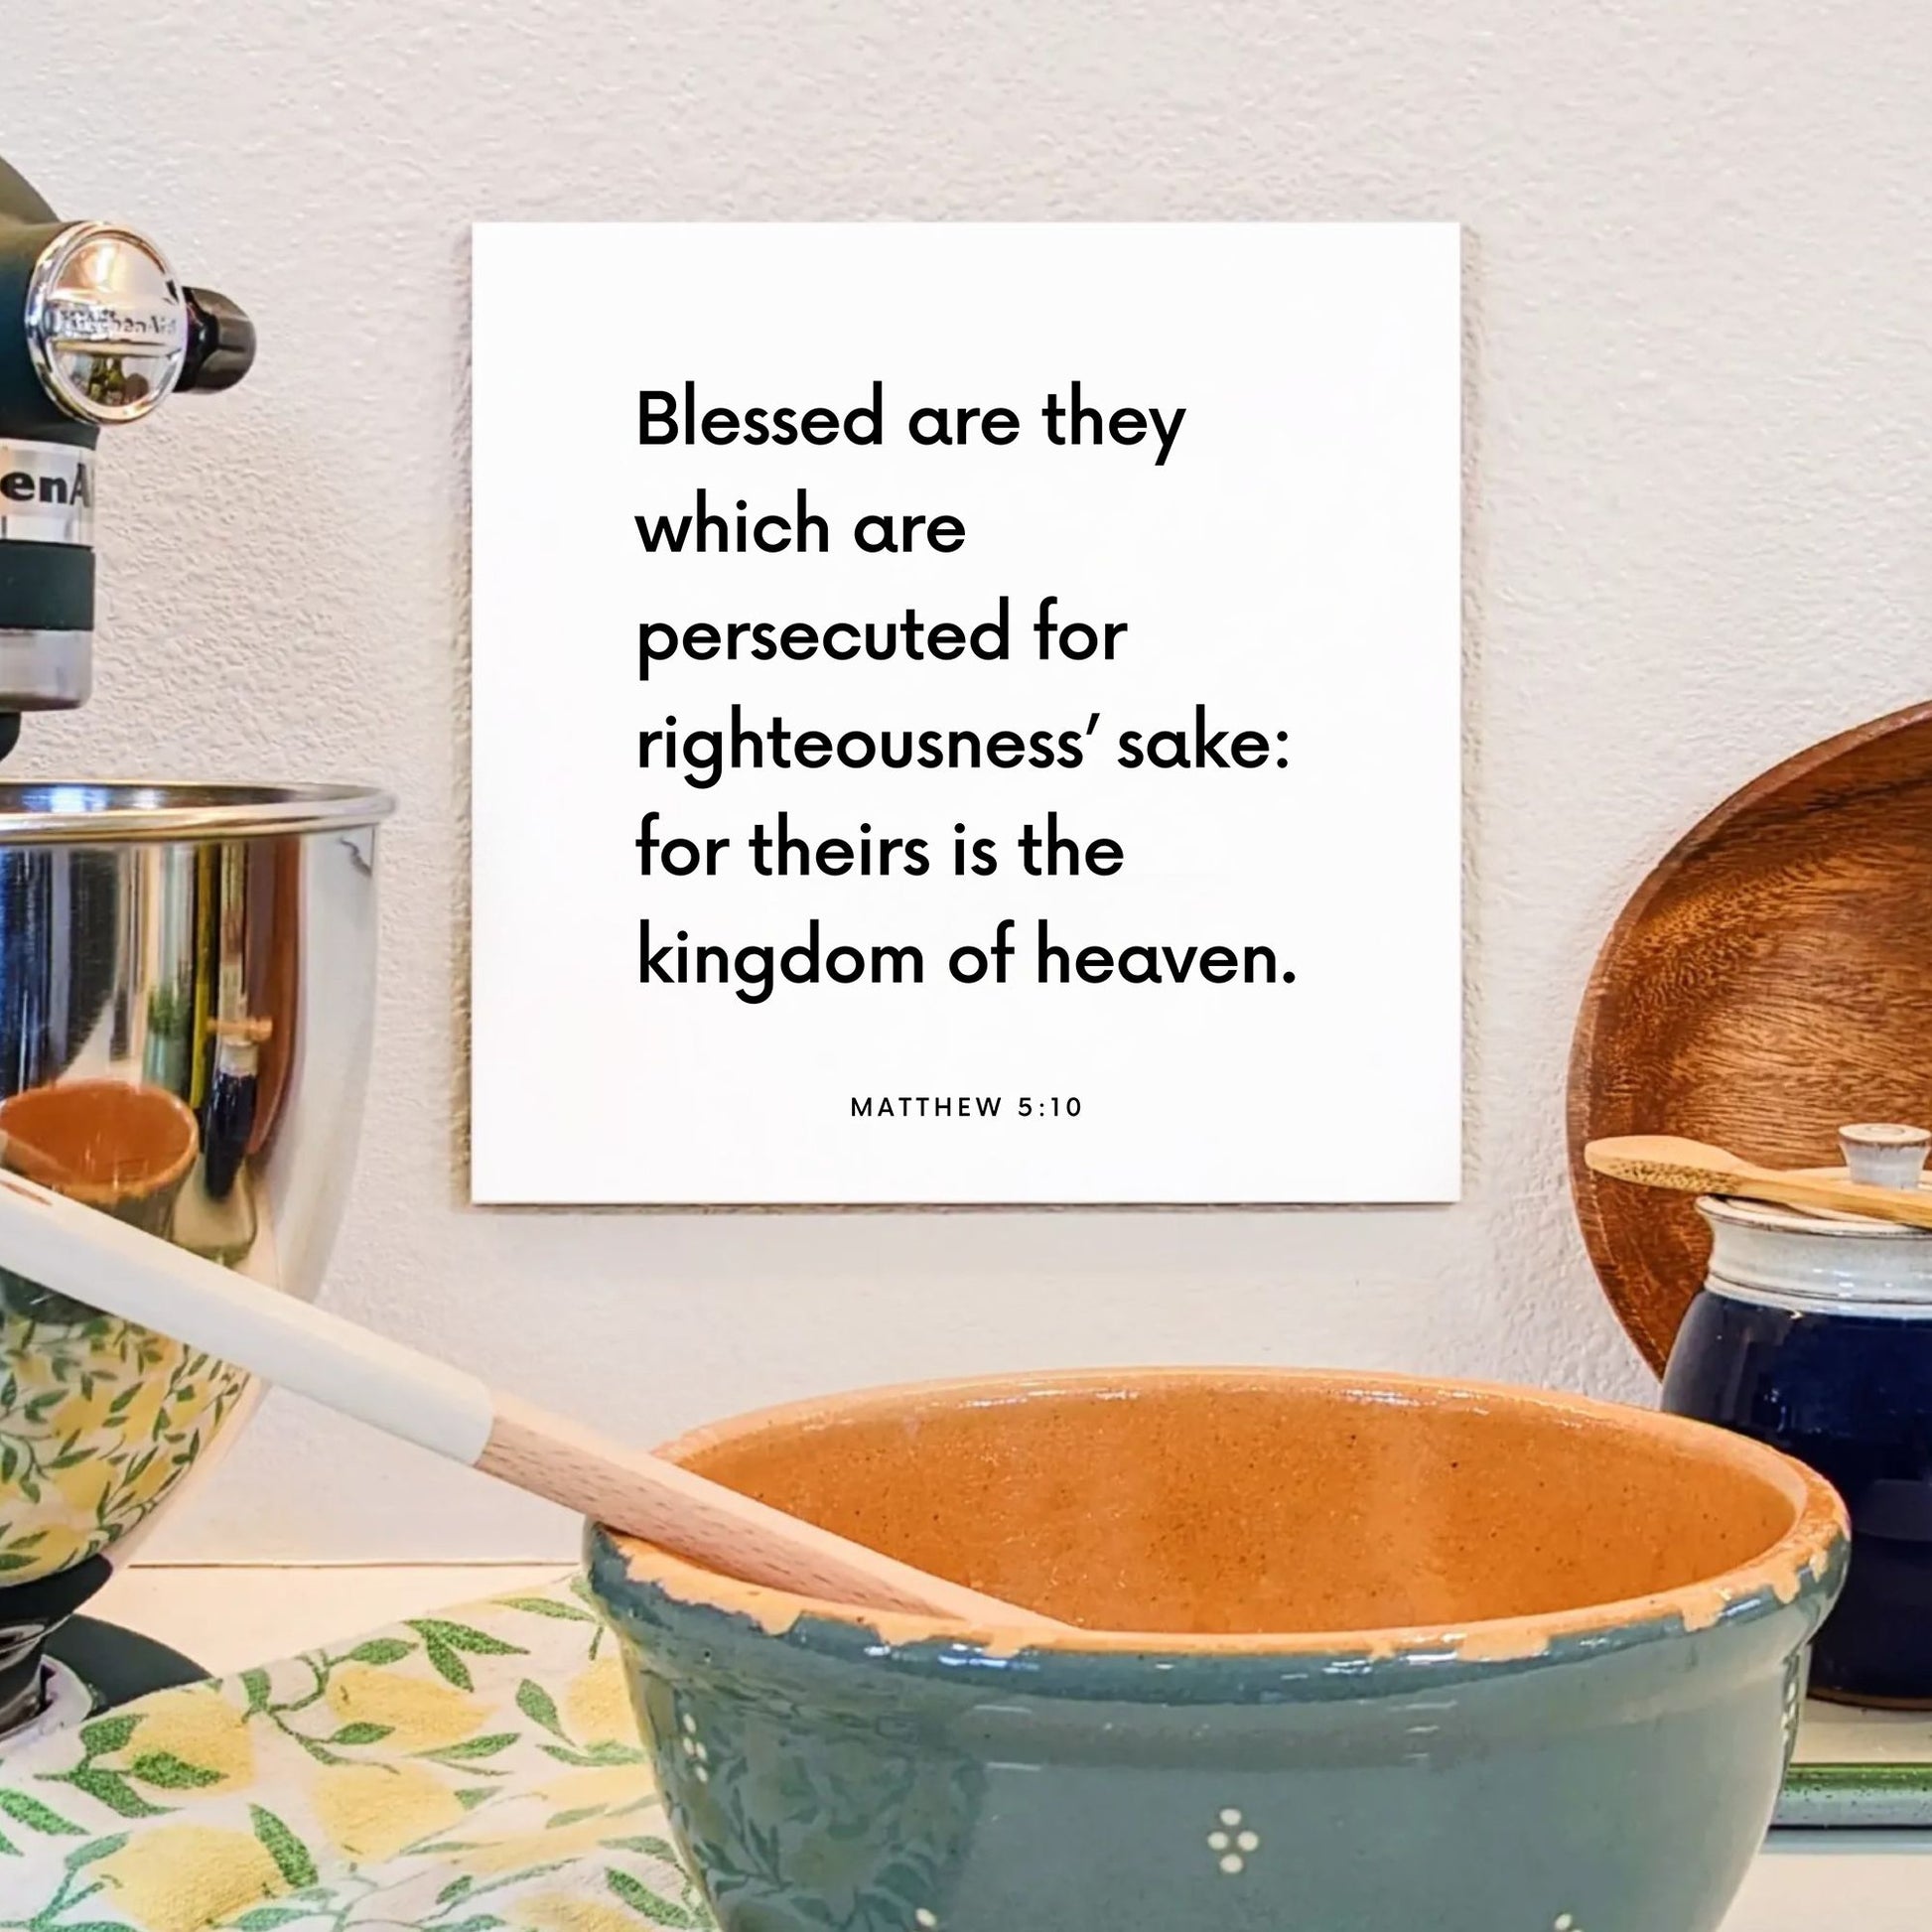 Kitchen mouting of the scripture tile for Matthew 5:10 - "Blessed are they which are persecuted for righteousness"